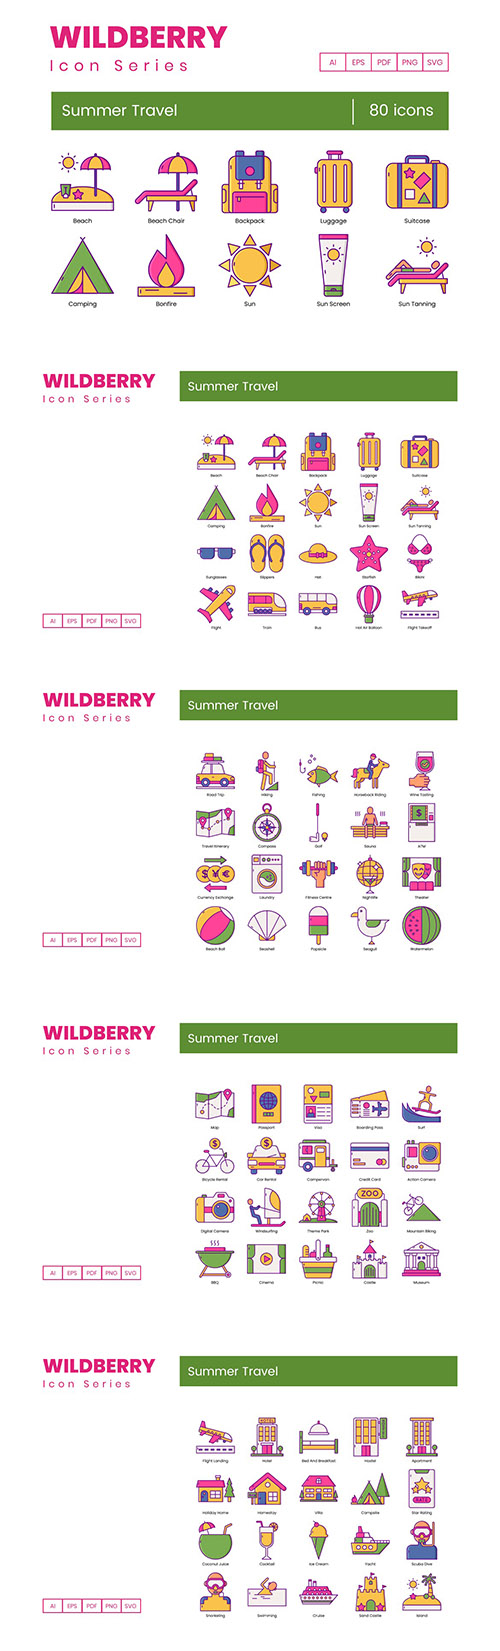 80 Summer Travel Icons | Wildberry Series